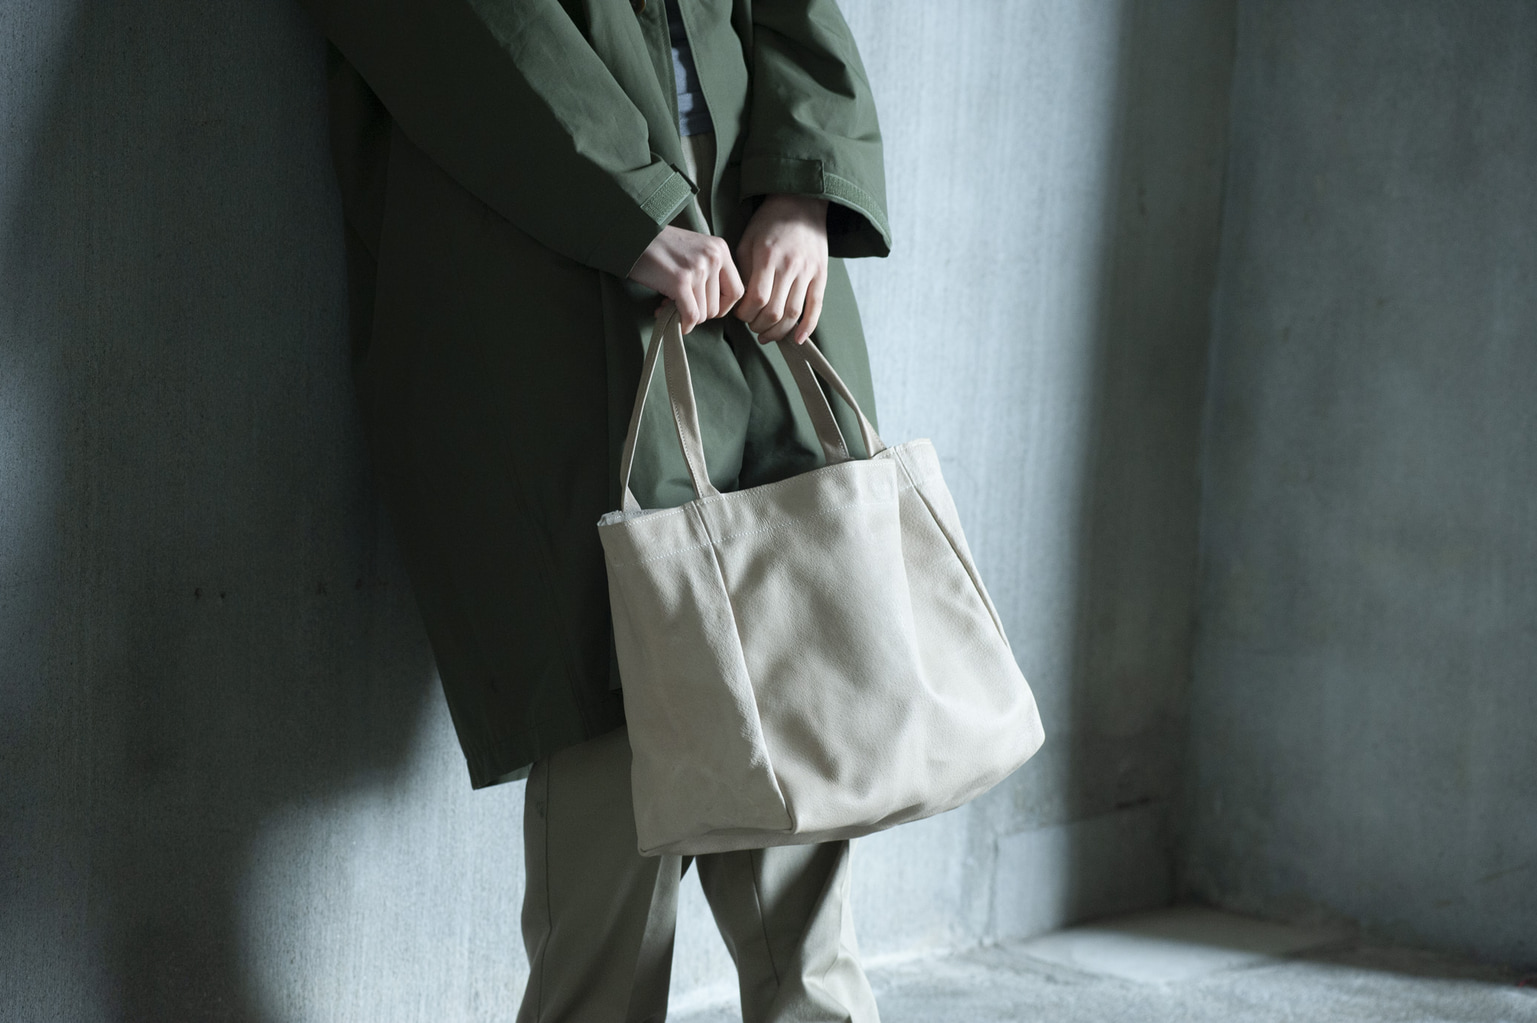 Shop Japan: 4 Japanese Leather Goods That Are Kind to the Environment